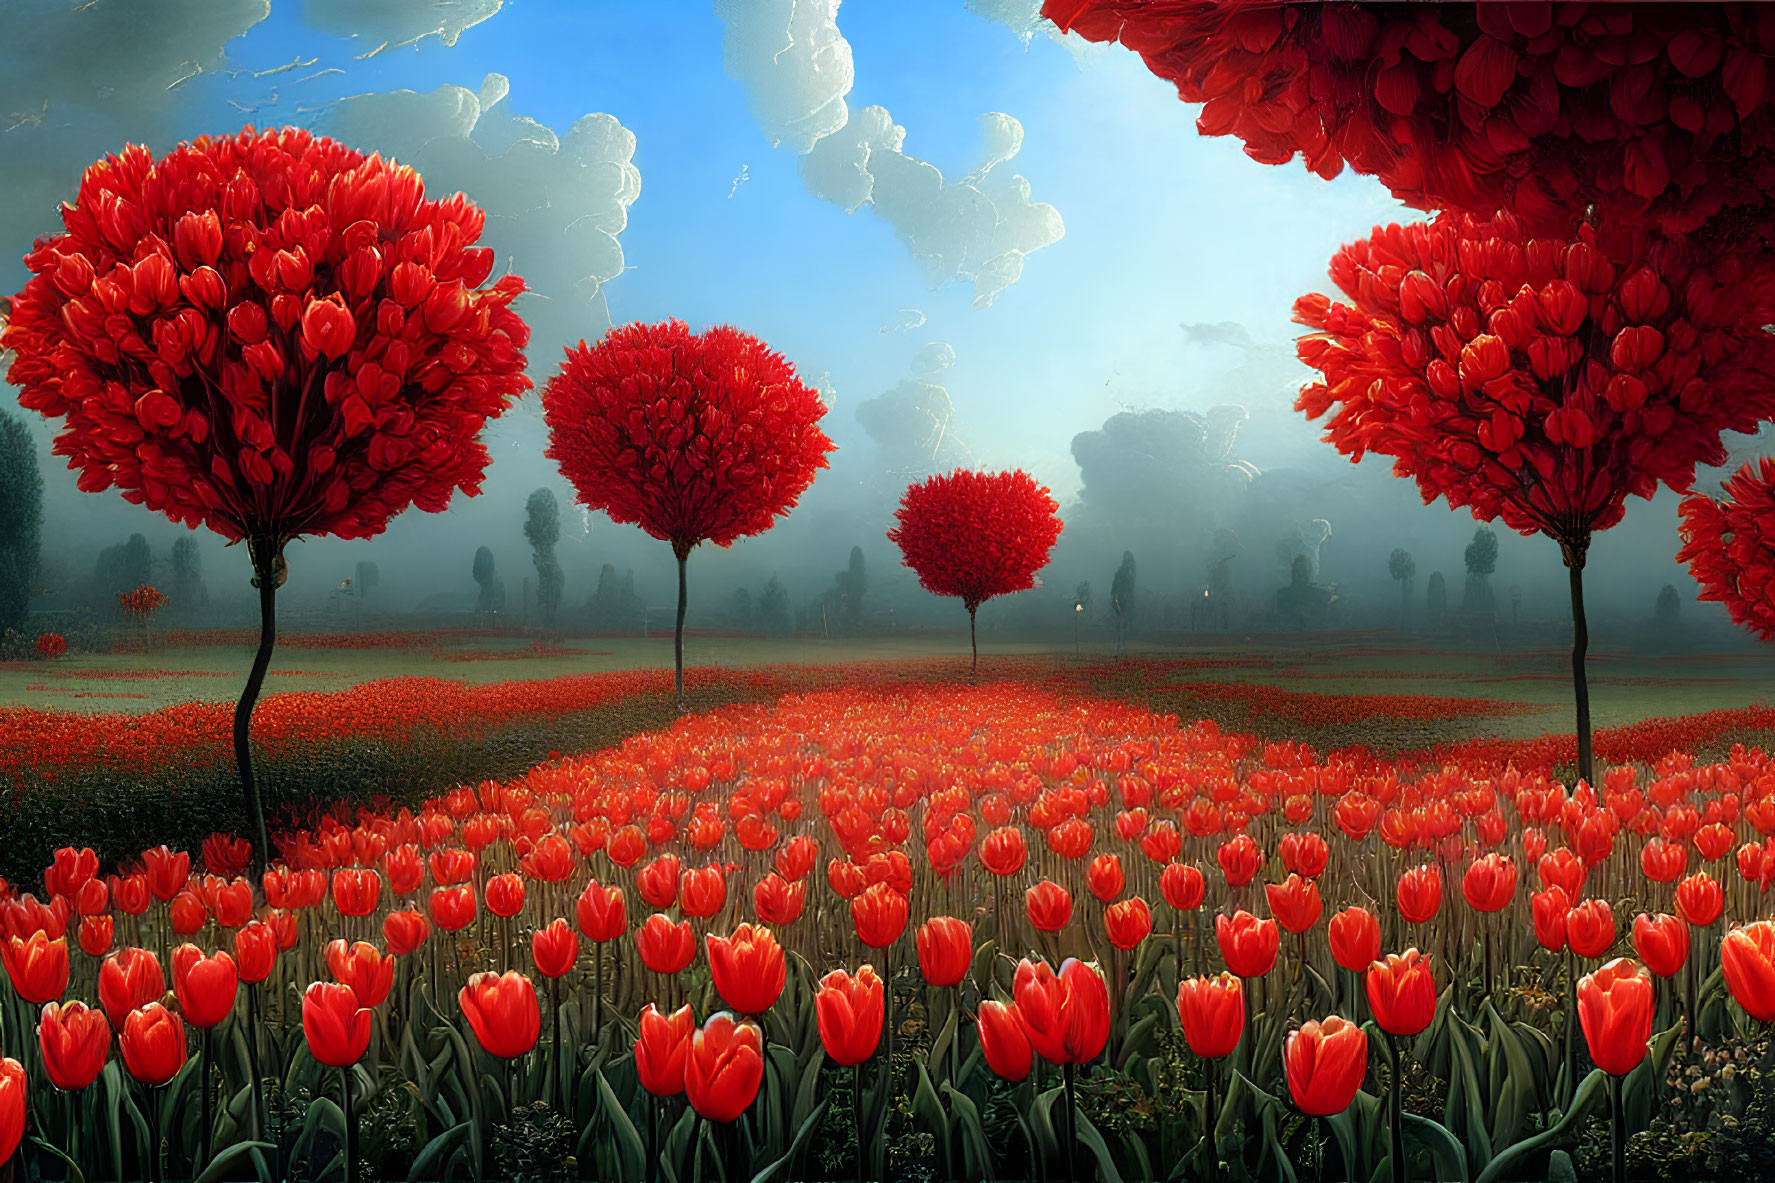 Colorful red tulip field with spherical treetops under blue sky